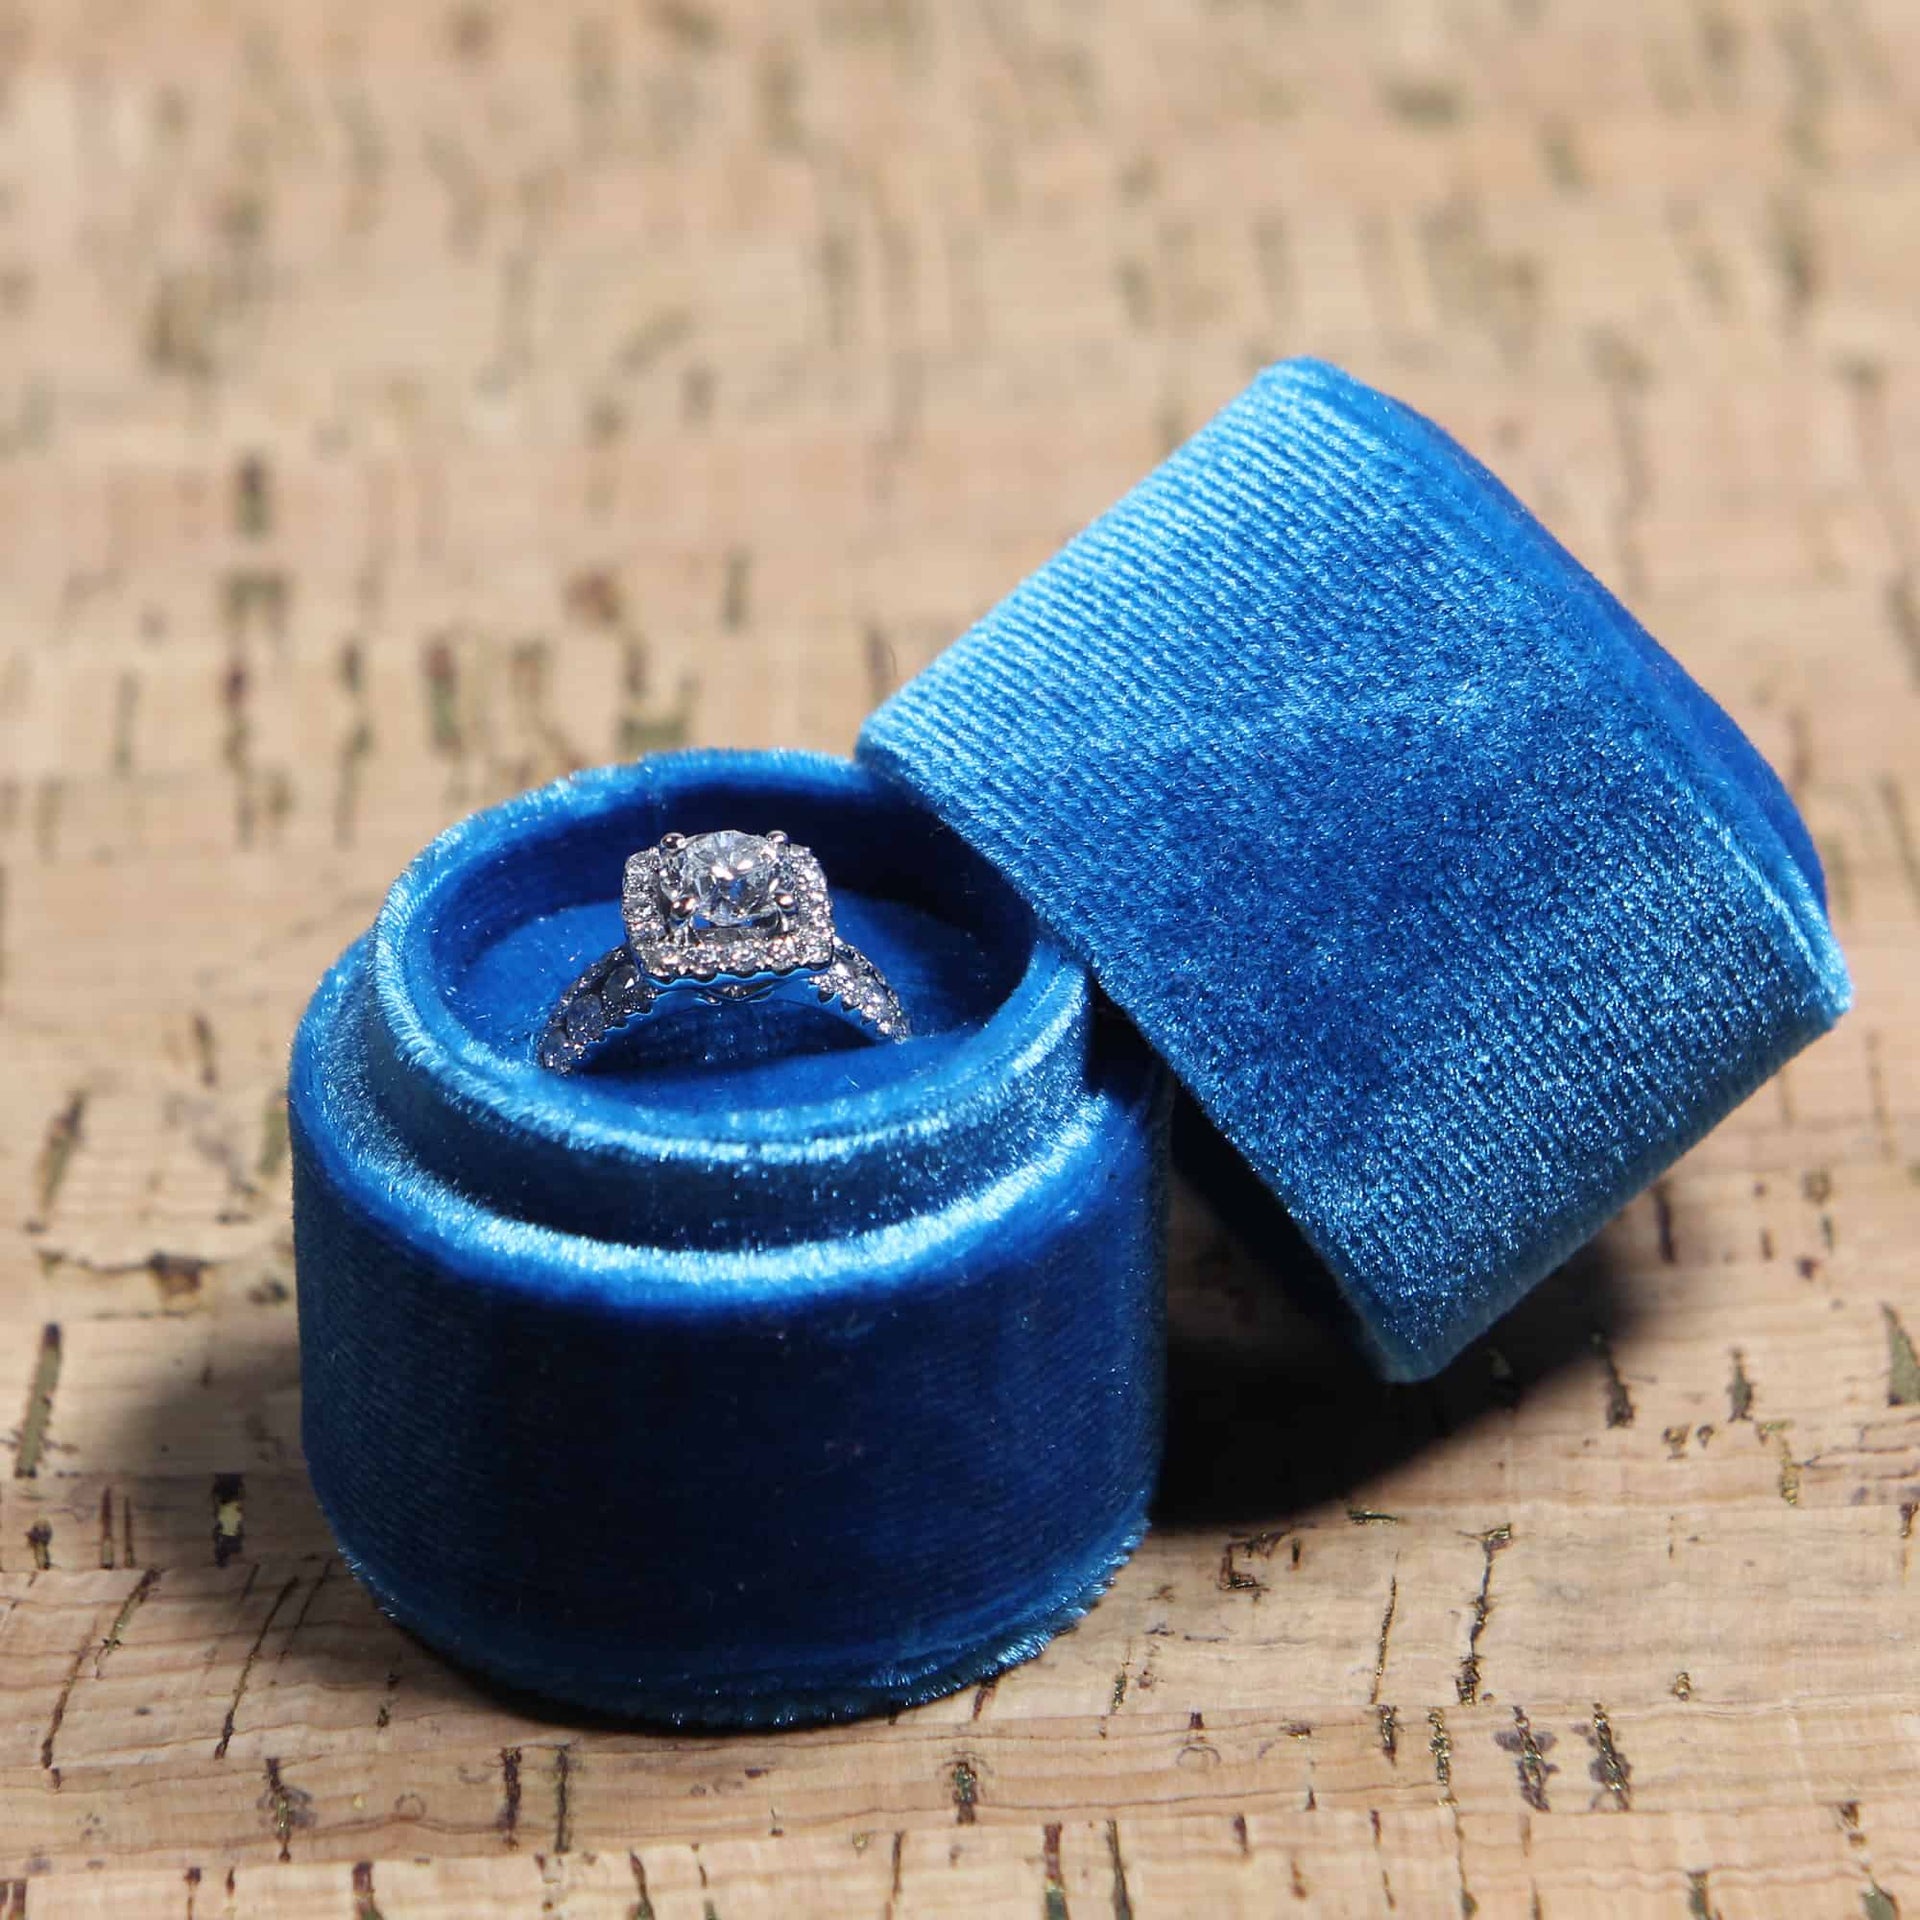 Evoke emotions of grandeur and extravagance with this stunning blue velvet ring box. Great for gifts, anniversaries, and proposals!